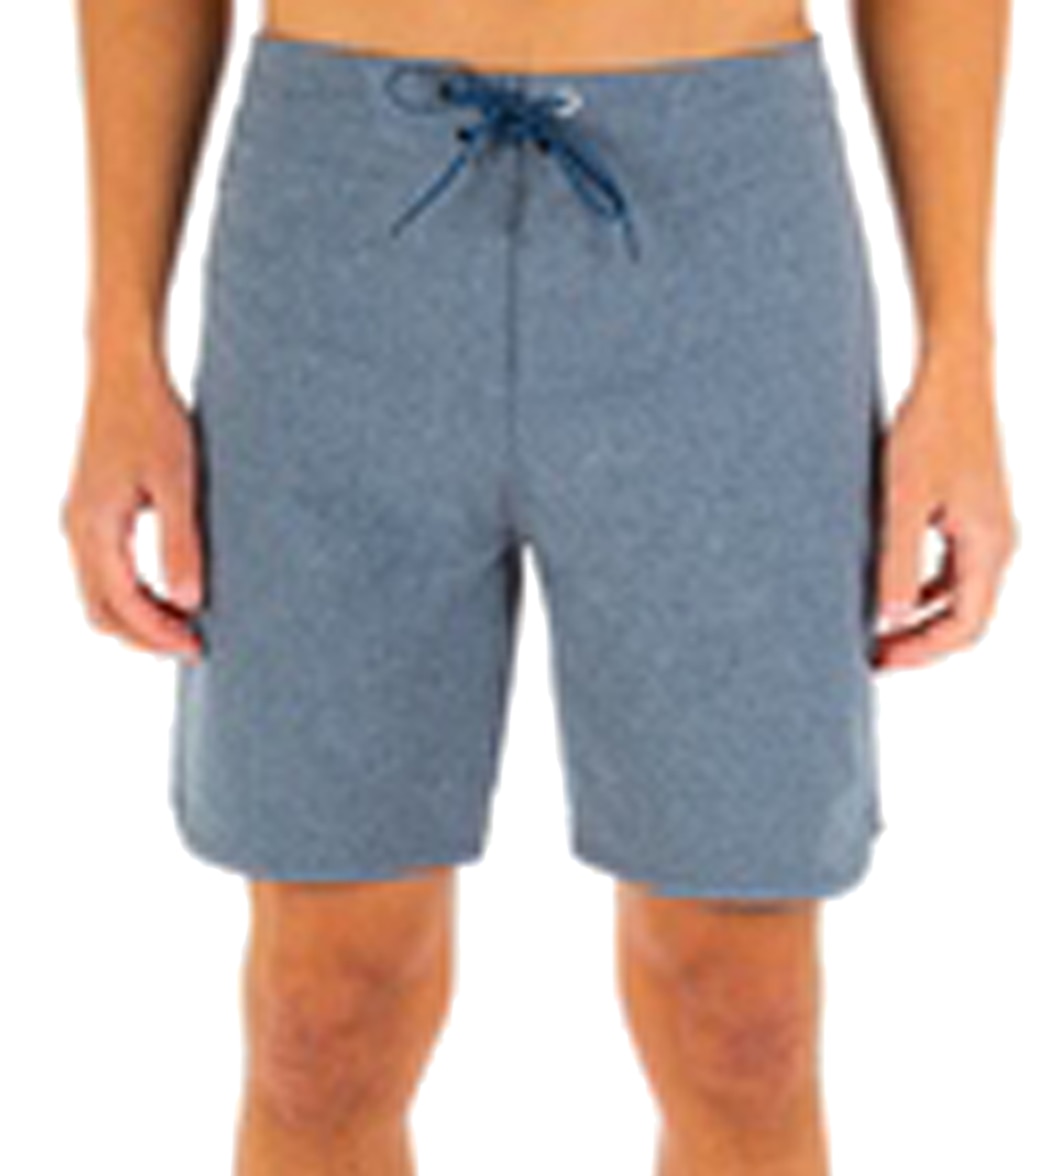 Hurley Phantom One And Only Heather 18 Boardshorts - Obsidian/Heather 31 - Swimoutlet.com